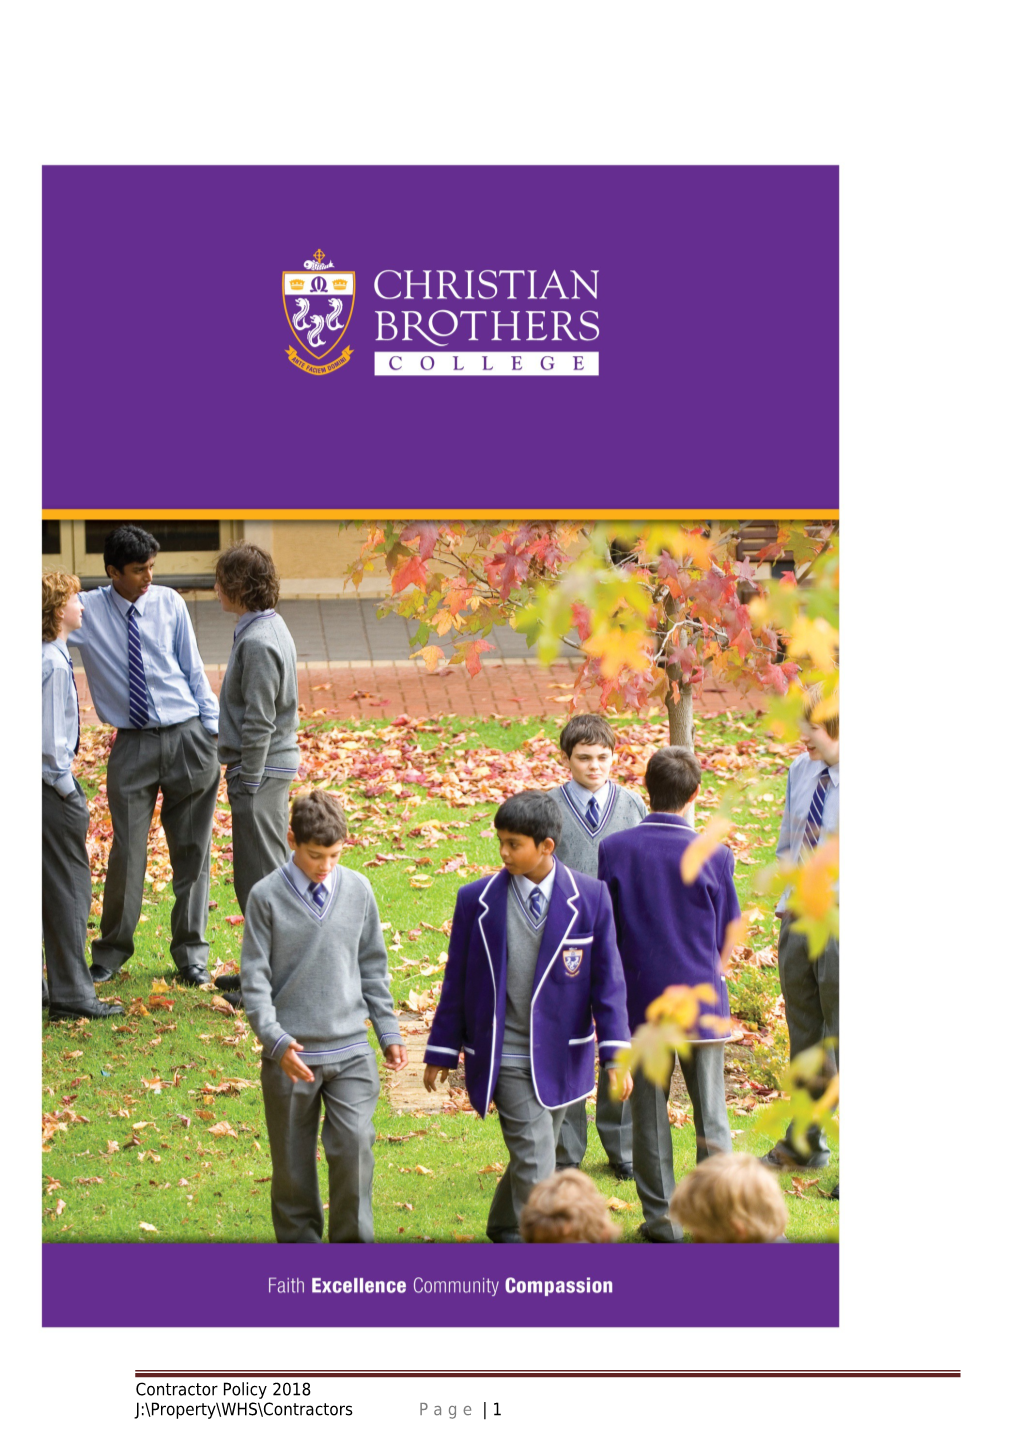 Christian Brothers College Is Committed to Ensuring the Health, Safety and Welfare of All